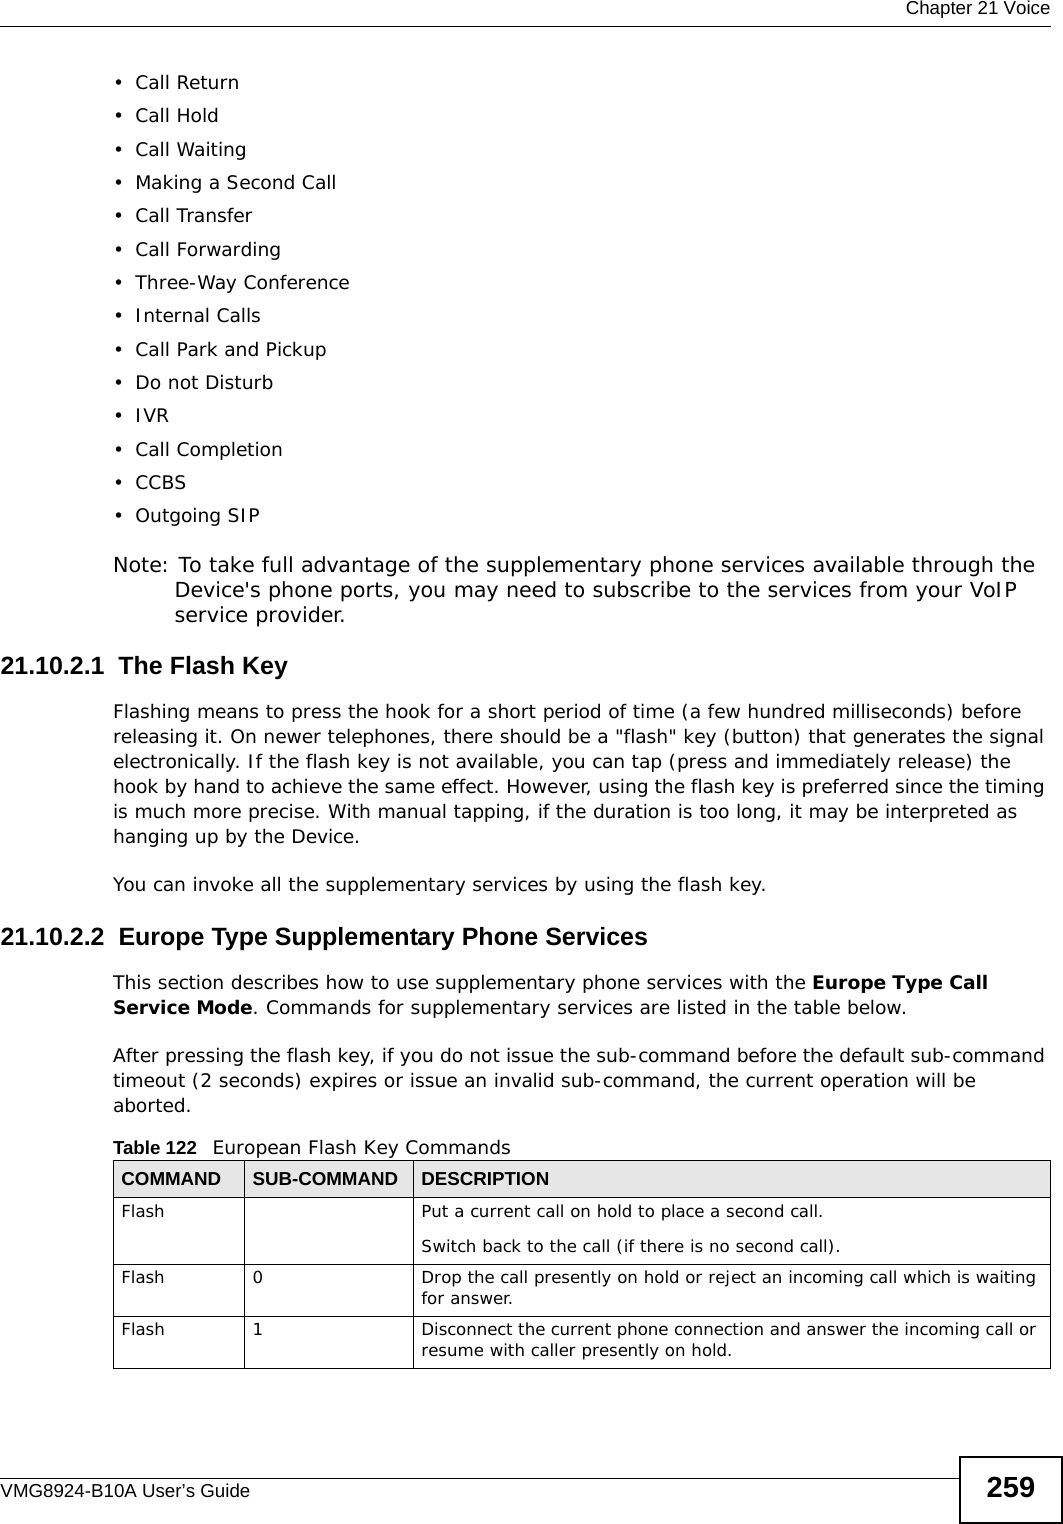  Chapter 21 VoiceVMG8924-B10A User’s Guide 259•Call Return•Call Hold• Call Waiting• Making a Second Call• Call Transfer• Call Forwarding • Three-Way Conference• Internal Calls• Call Park and Pickup• Do not Disturb•IVR•Call Completion•CCBS• Outgoing SIPNote: To take full advantage of the supplementary phone services available through the Device&apos;s phone ports, you may need to subscribe to the services from your VoIP service provider.21.10.2.1  The Flash KeyFlashing means to press the hook for a short period of time (a few hundred milliseconds) before releasing it. On newer telephones, there should be a &quot;flash&quot; key (button) that generates the signal electronically. If the flash key is not available, you can tap (press and immediately release) the hook by hand to achieve the same effect. However, using the flash key is preferred since the timing is much more precise. With manual tapping, if the duration is too long, it may be interpreted as hanging up by the Device.You can invoke all the supplementary services by using the flash key. 21.10.2.2  Europe Type Supplementary Phone ServicesThis section describes how to use supplementary phone services with the Europe Type Call Service Mode. Commands for supplementary services are listed in the table below.After pressing the flash key, if you do not issue the sub-command before the default sub-command timeout (2 seconds) expires or issue an invalid sub-command, the current operation will be aborted.Table 122   European Flash Key CommandsCOMMAND SUB-COMMAND DESCRIPTIONFlash  Put a current call on hold to place a second call.Switch back to the call (if there is no second call).Flash 0 Drop the call presently on hold or reject an incoming call which is waiting for answer.Flash 1 Disconnect the current phone connection and answer the incoming call or resume with caller presently on hold.